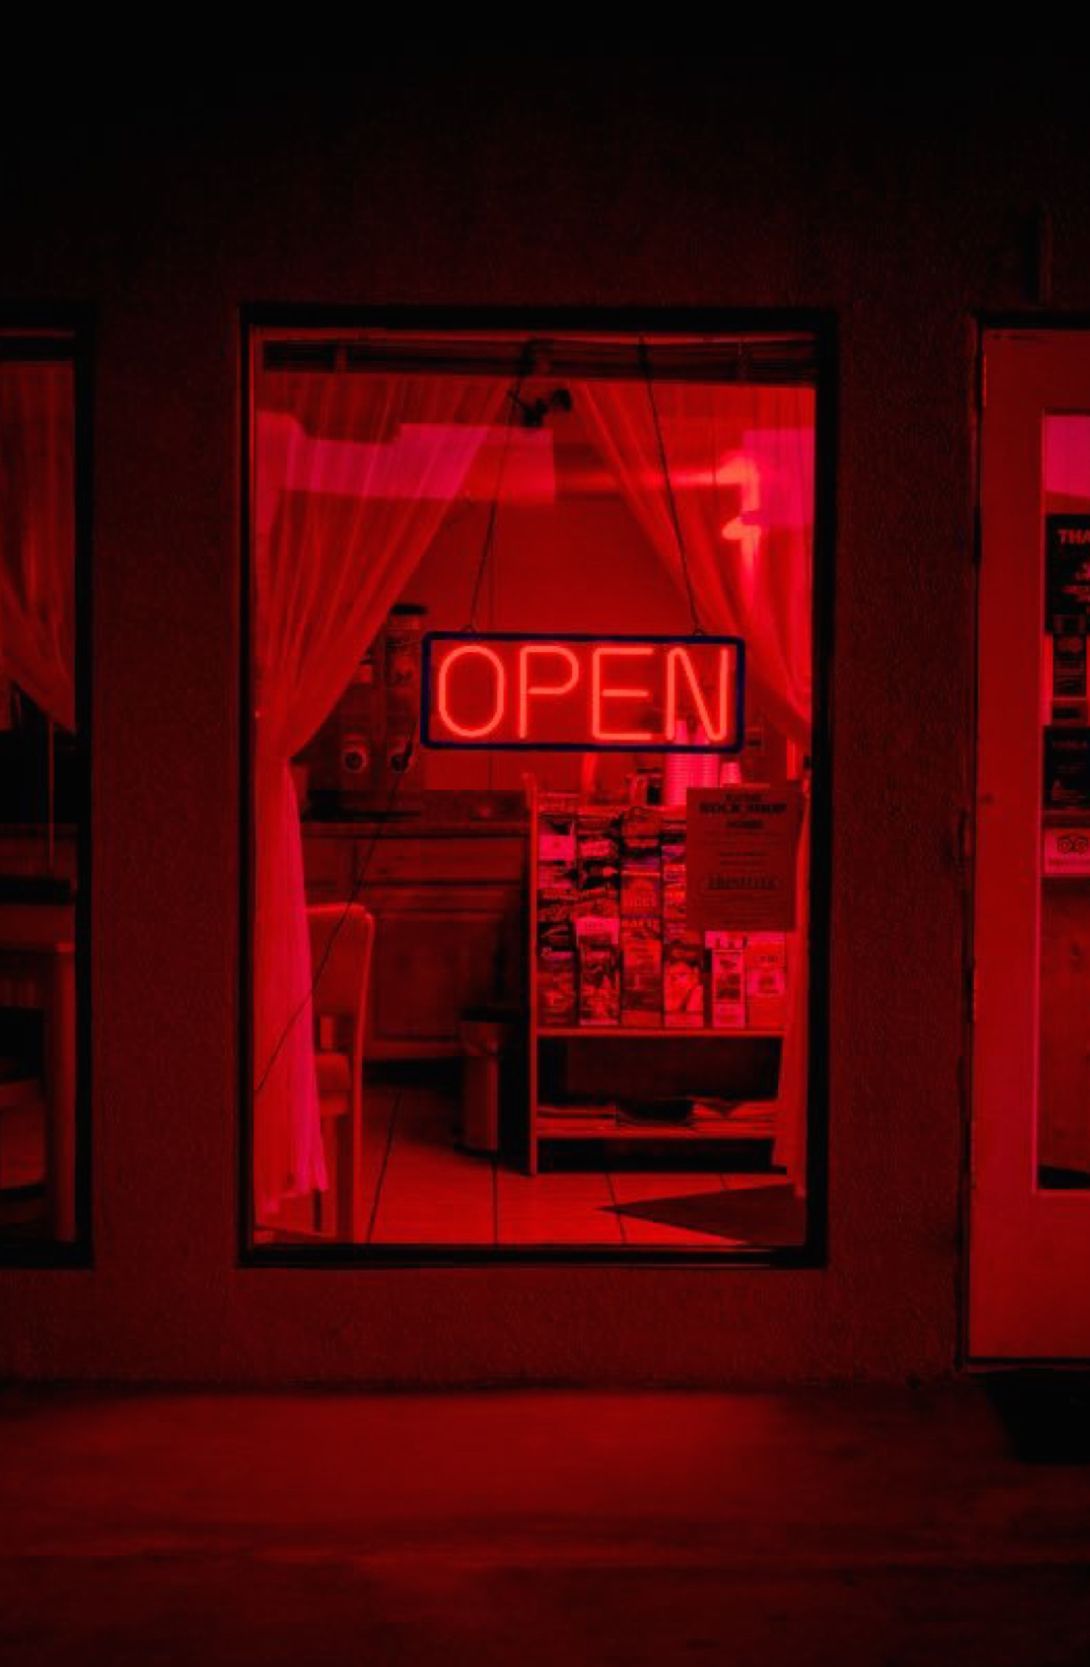 A red neon sign that says open - Red, grunge, light red